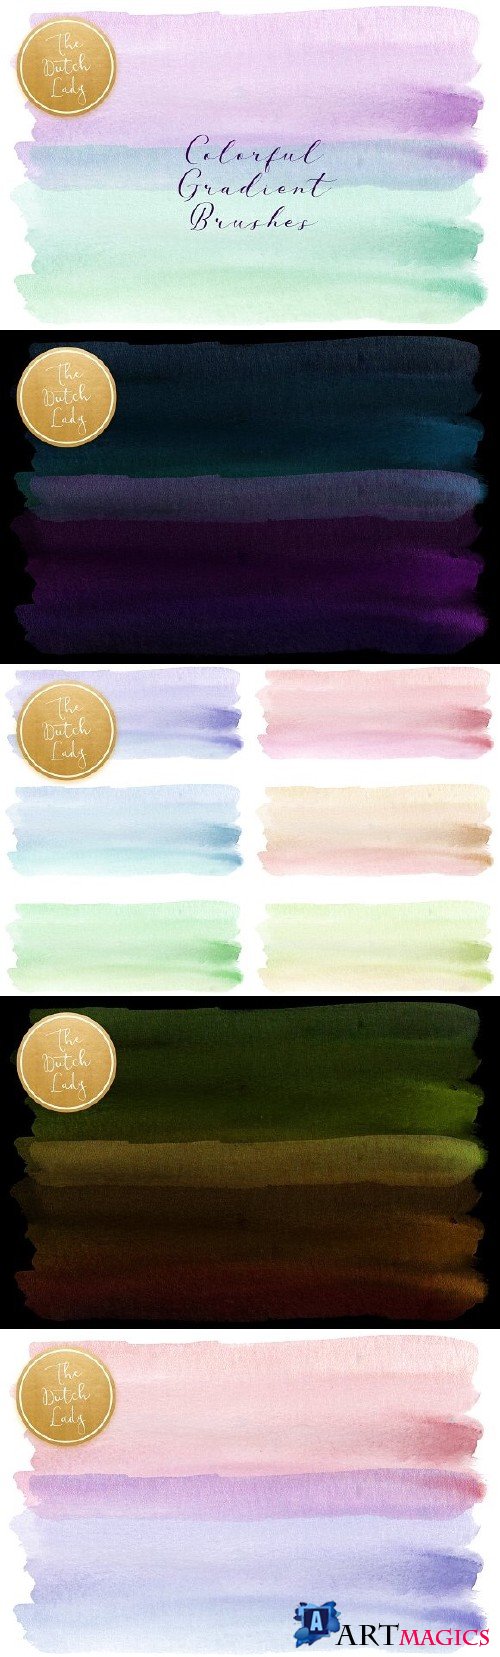 Colorful Gradient Watercolor Brushes - 3516896